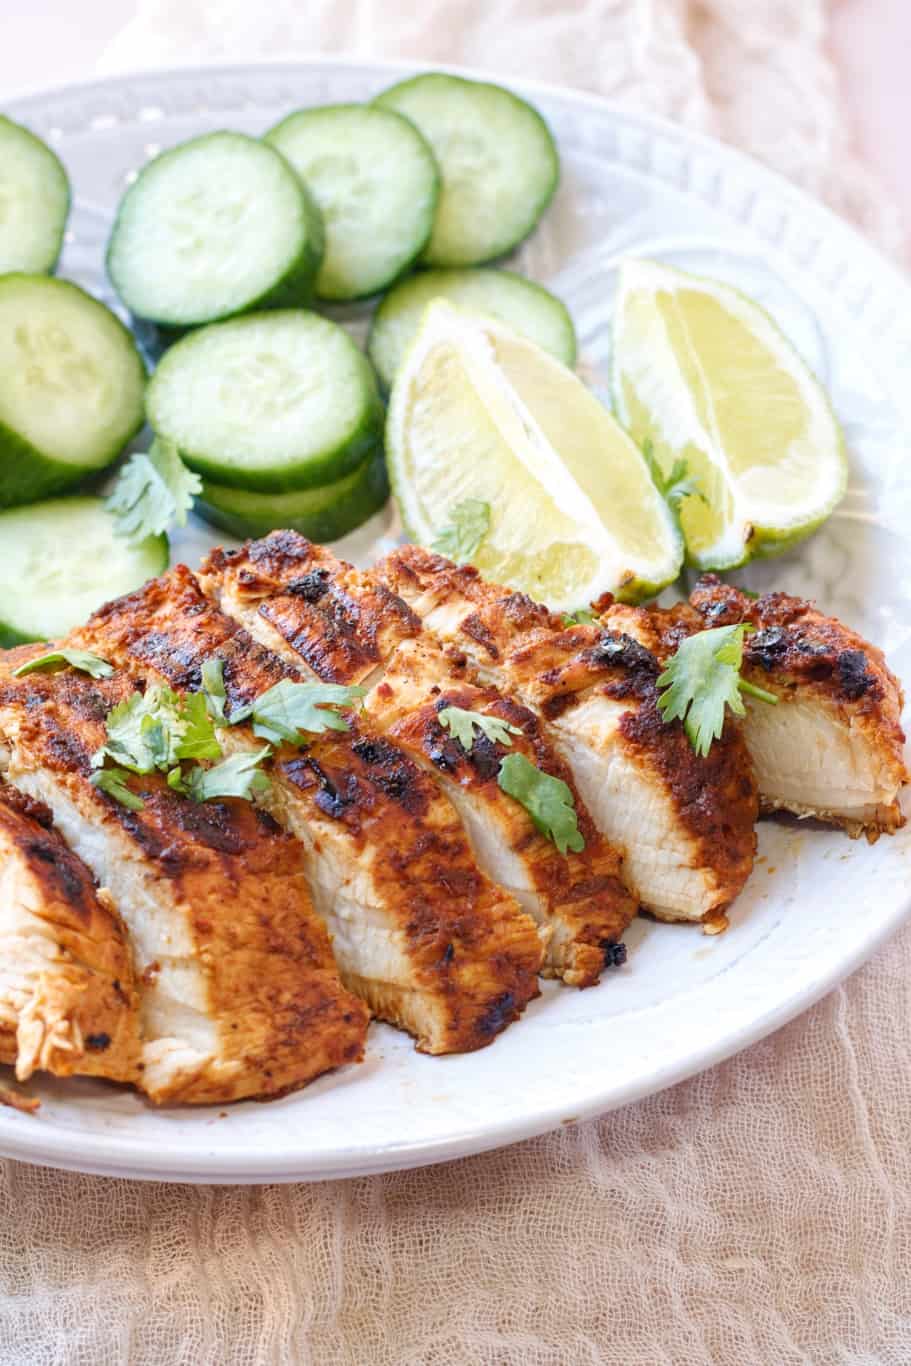 juicy chicken bursting with flavor from the chipotle marinade served with cucumber slices and lemon wedges